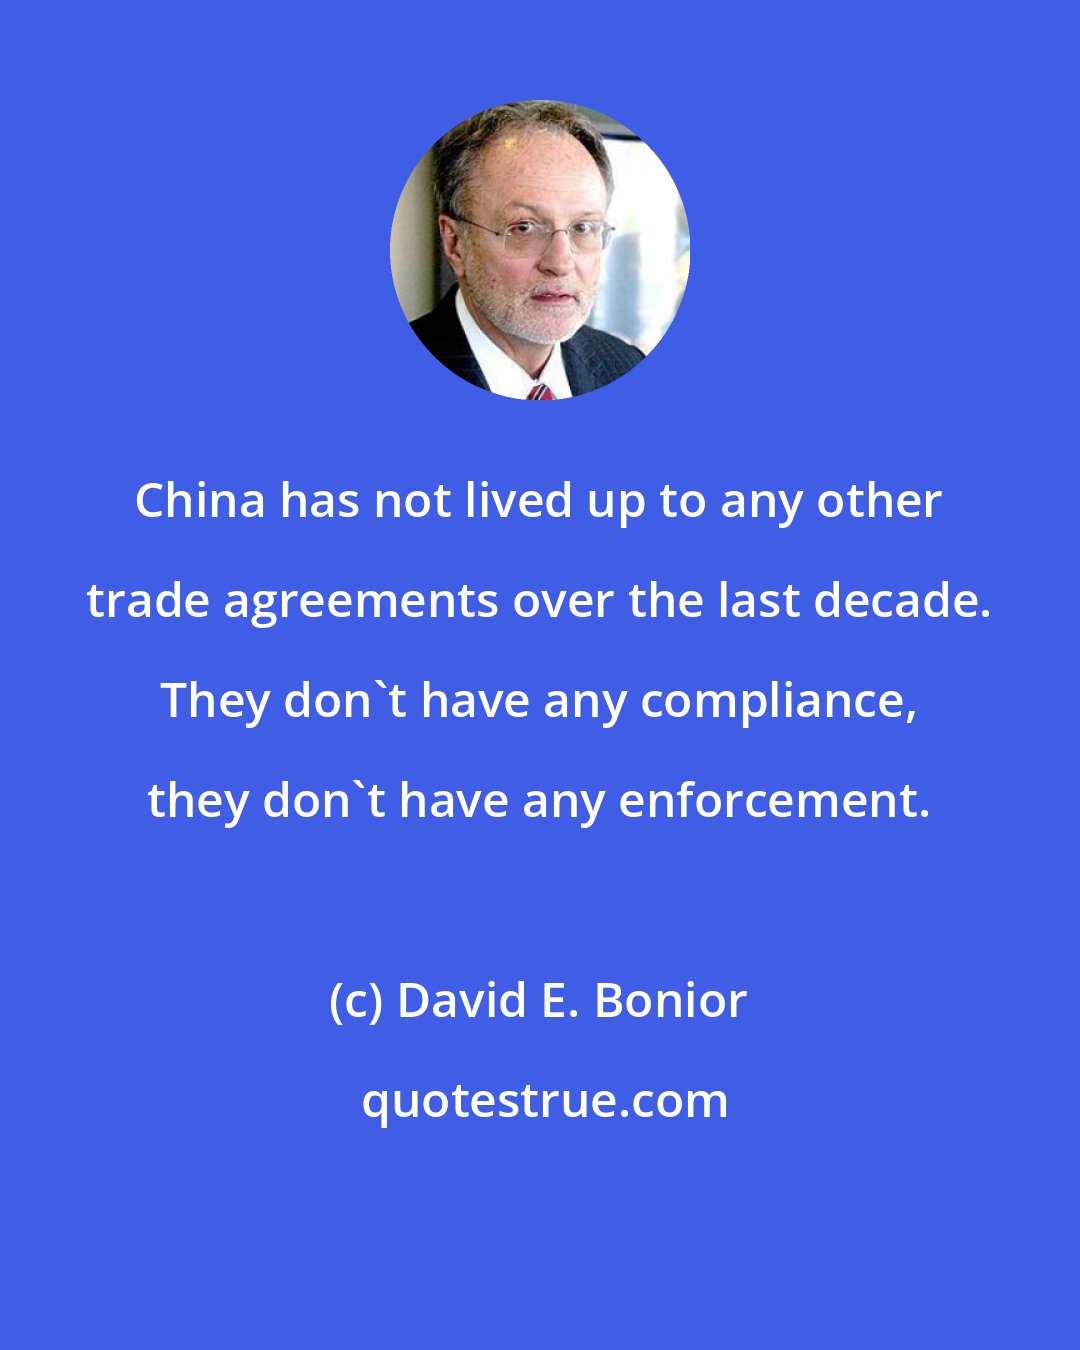 David E. Bonior: China has not lived up to any other trade agreements over the last decade. They don't have any compliance, they don't have any enforcement.